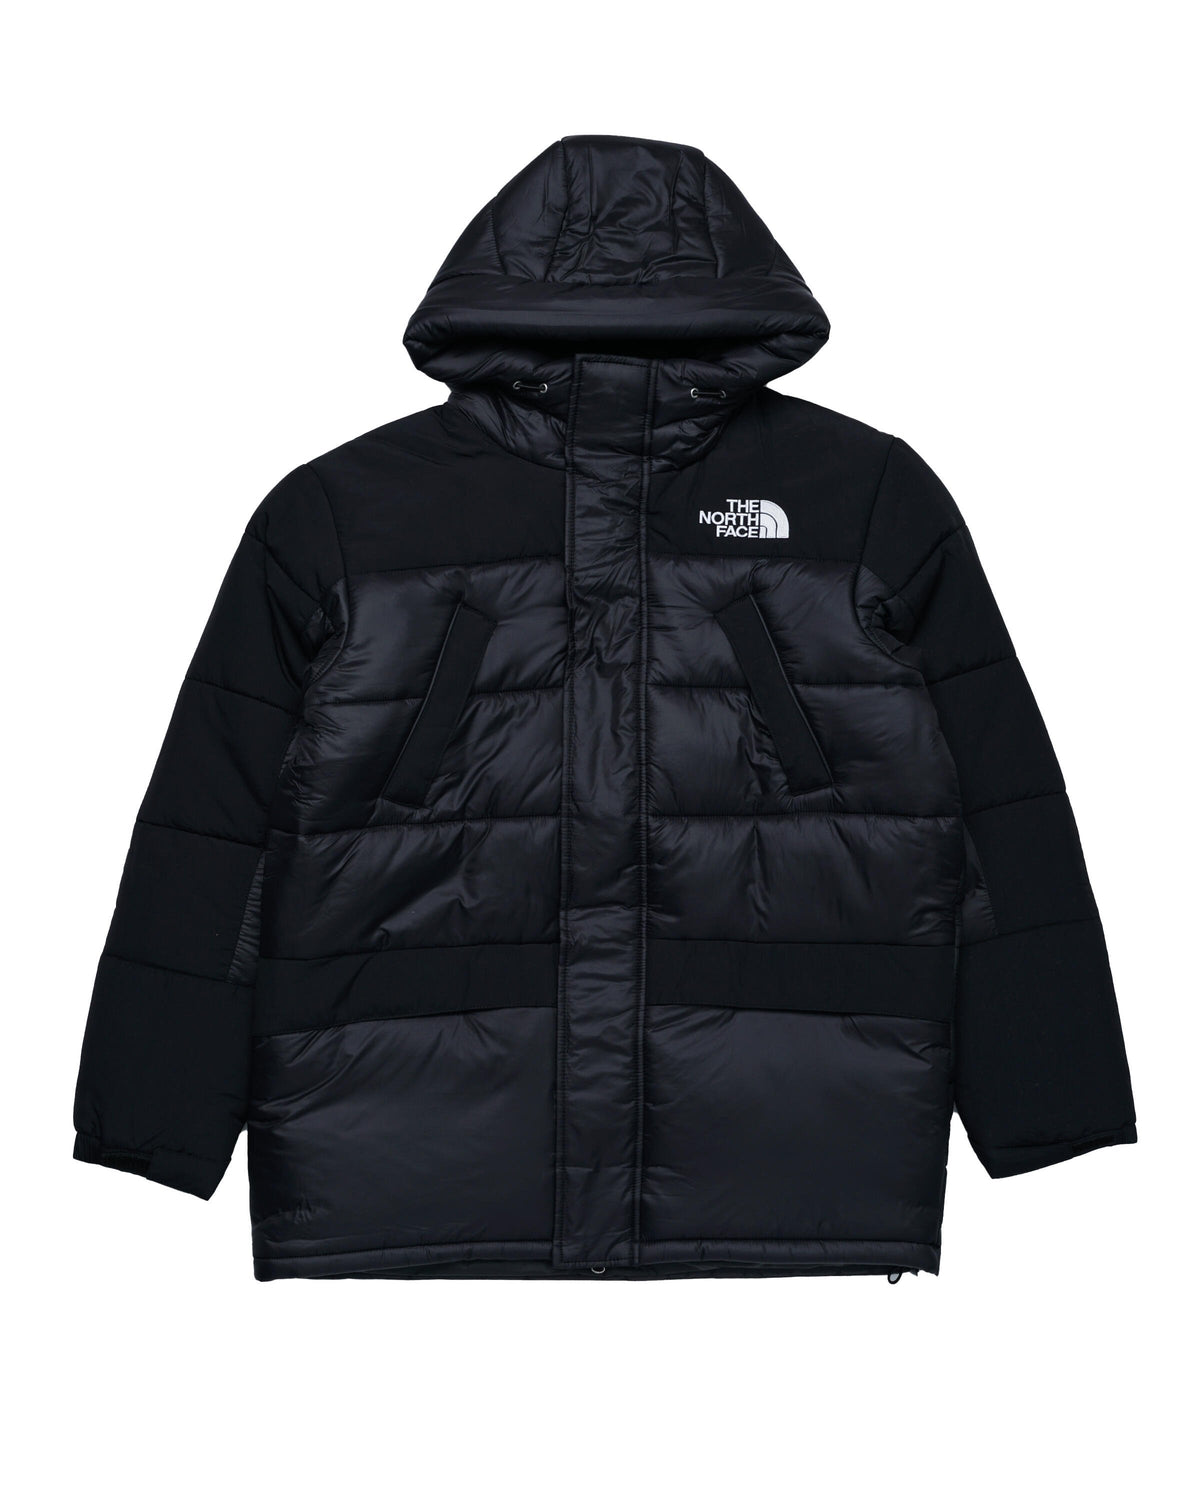 The North Face Himalayan Insulated Parka